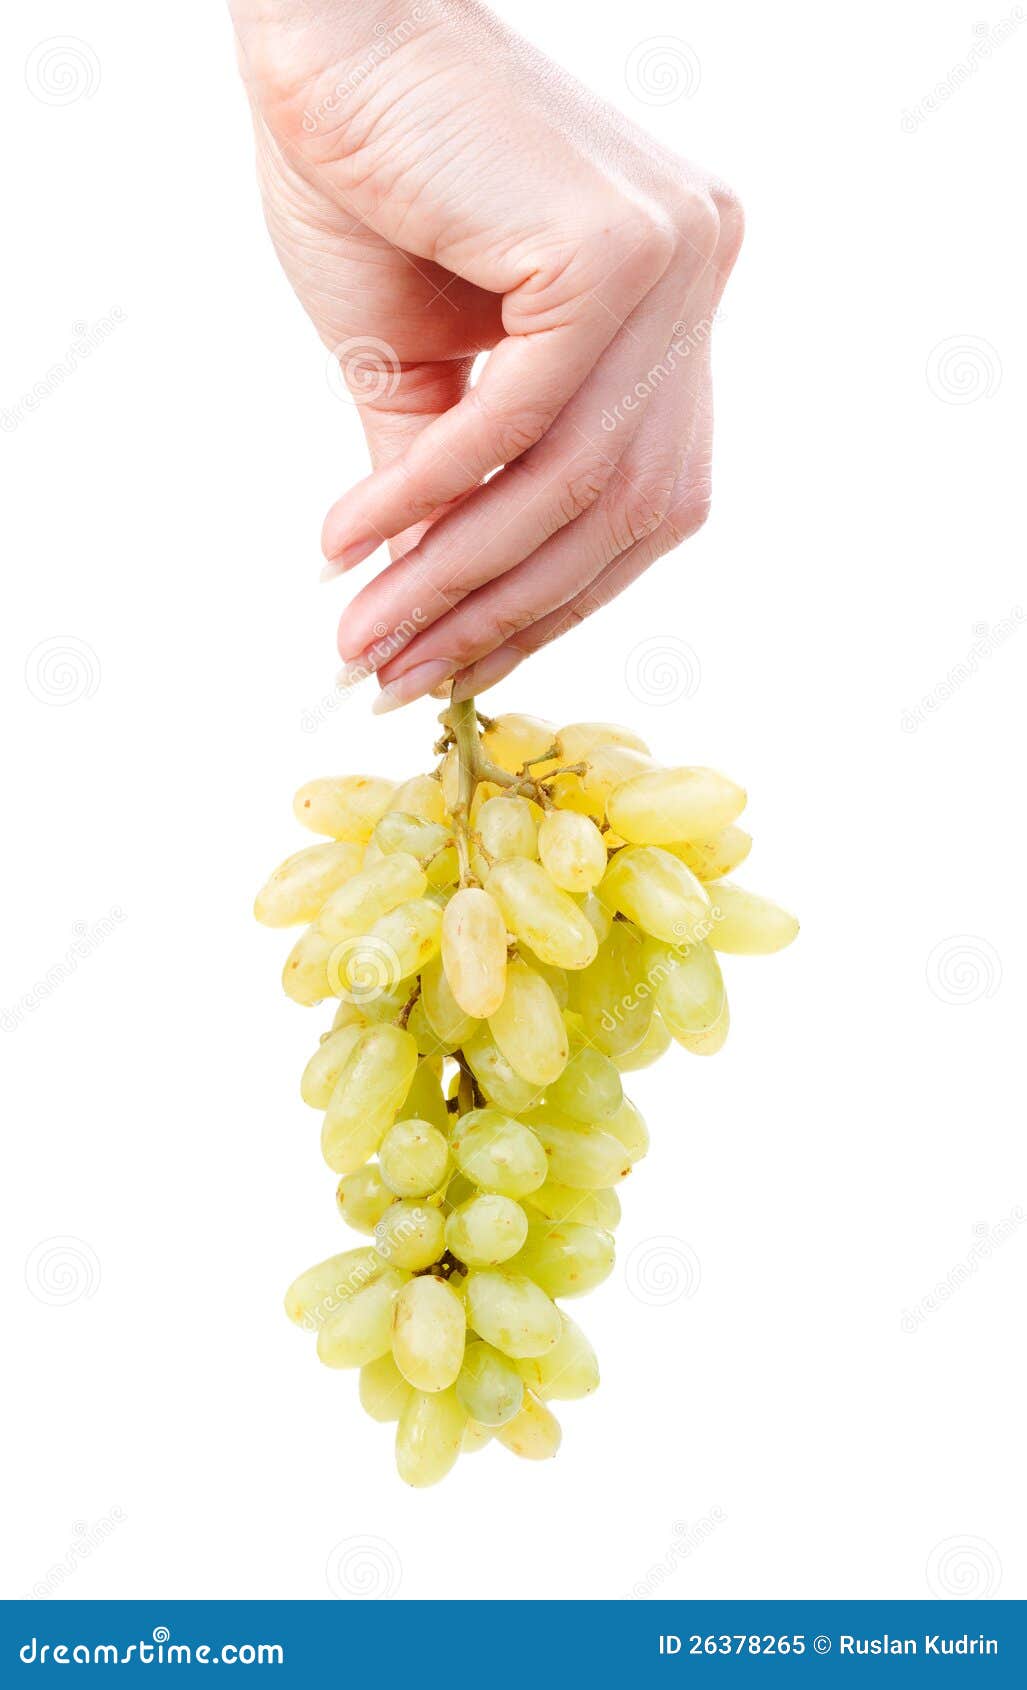 Bunch of a green grapes in hand of the woman. Woman hand holding bunch of green grapes isolated on the white background